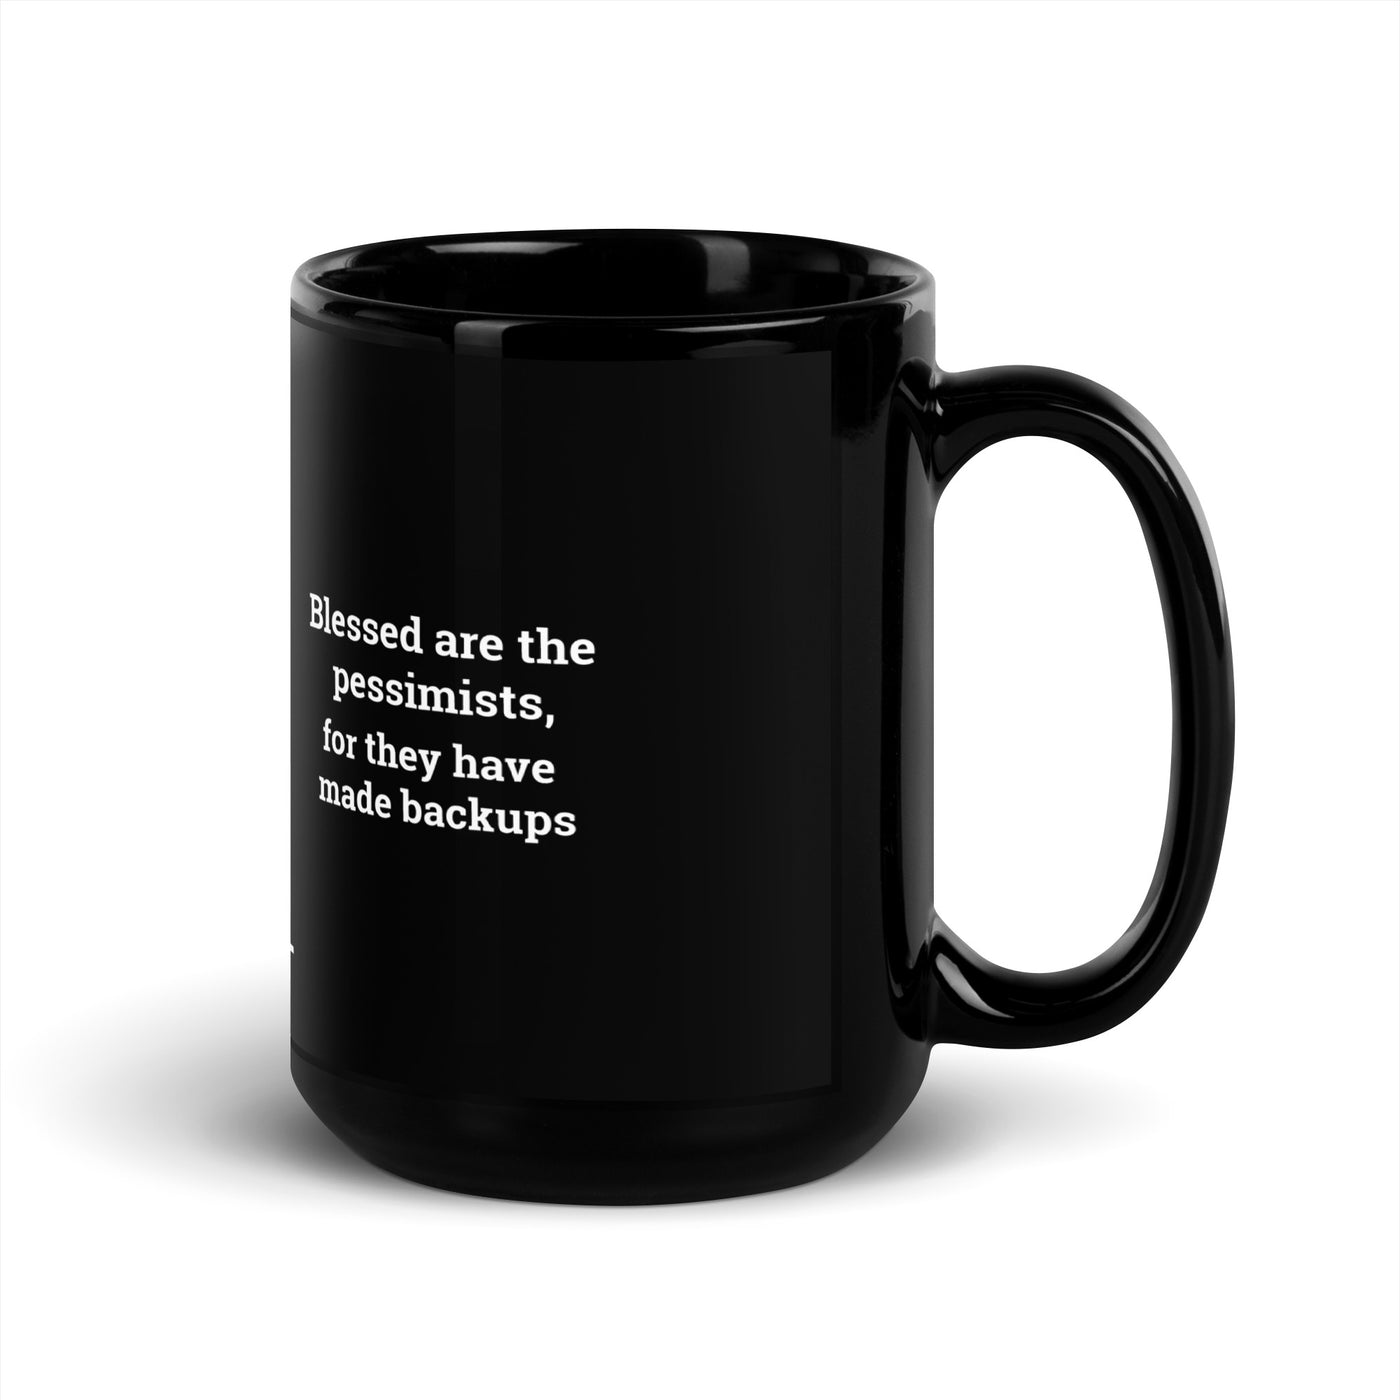 Blessed are the pessimists for they have made backups V1 - Black Glossy Mug